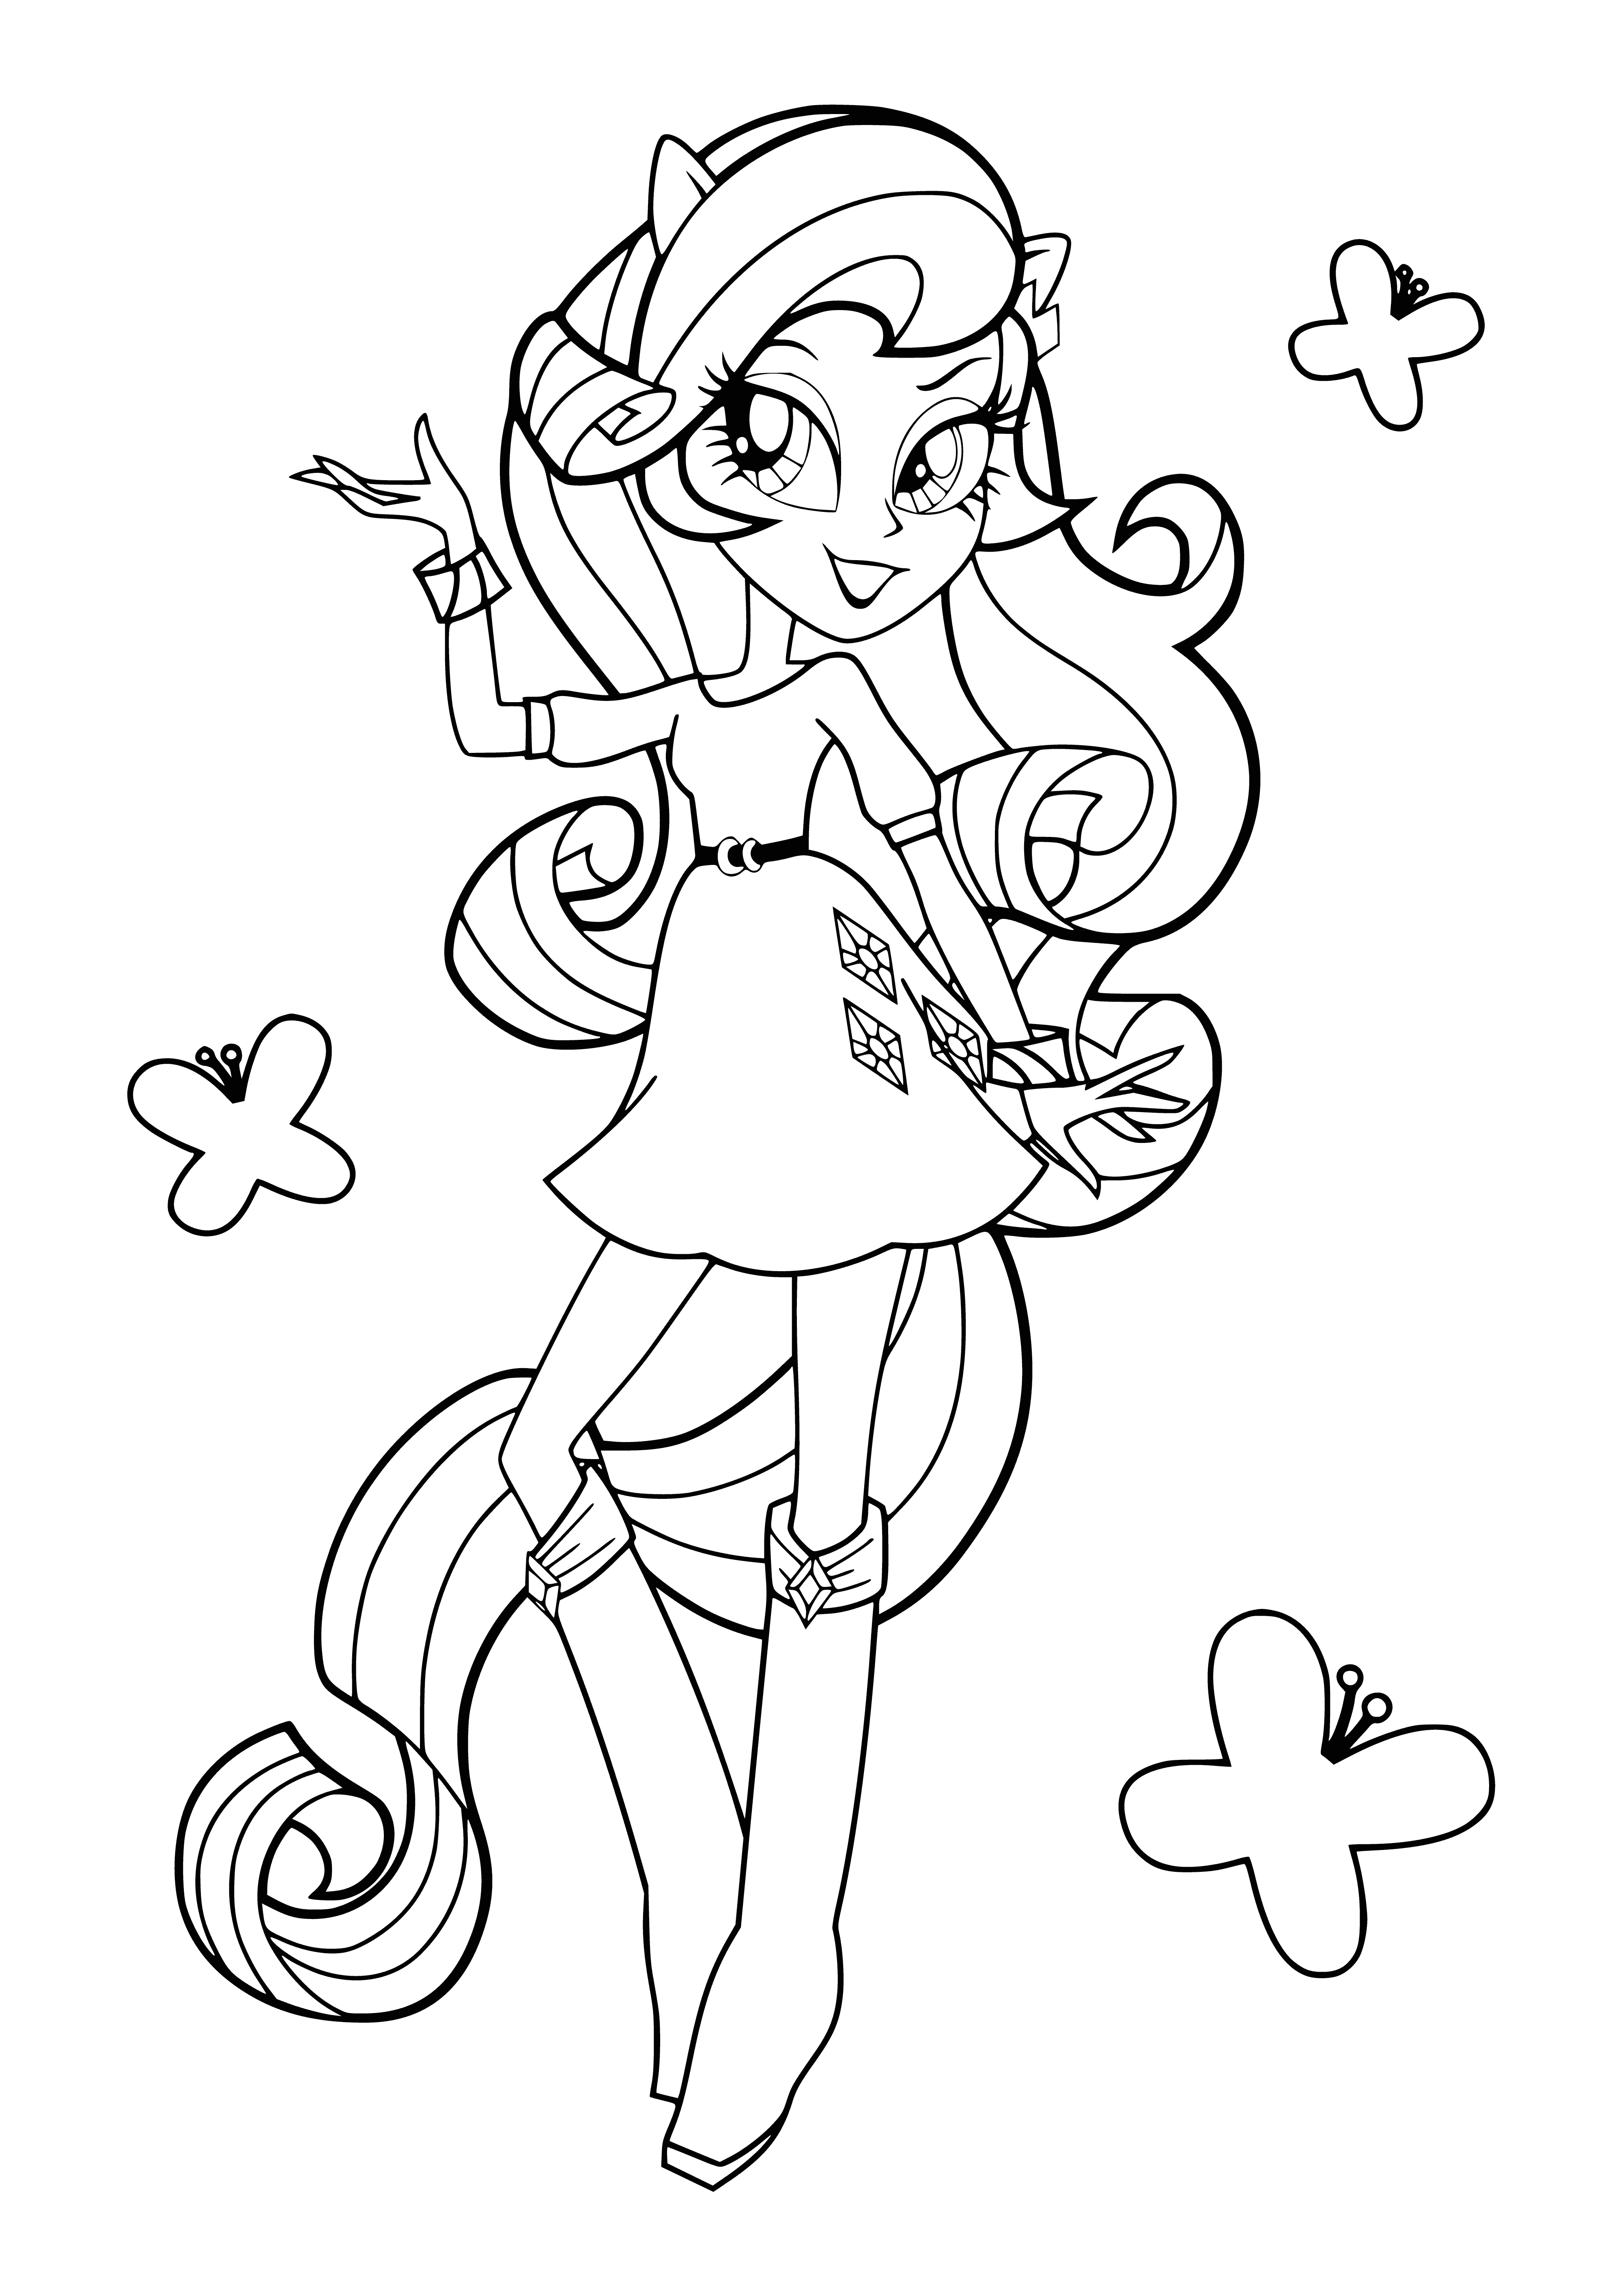 coloring page: Girls in school uniforms, each with unique hairstyle, smiling and friendly.